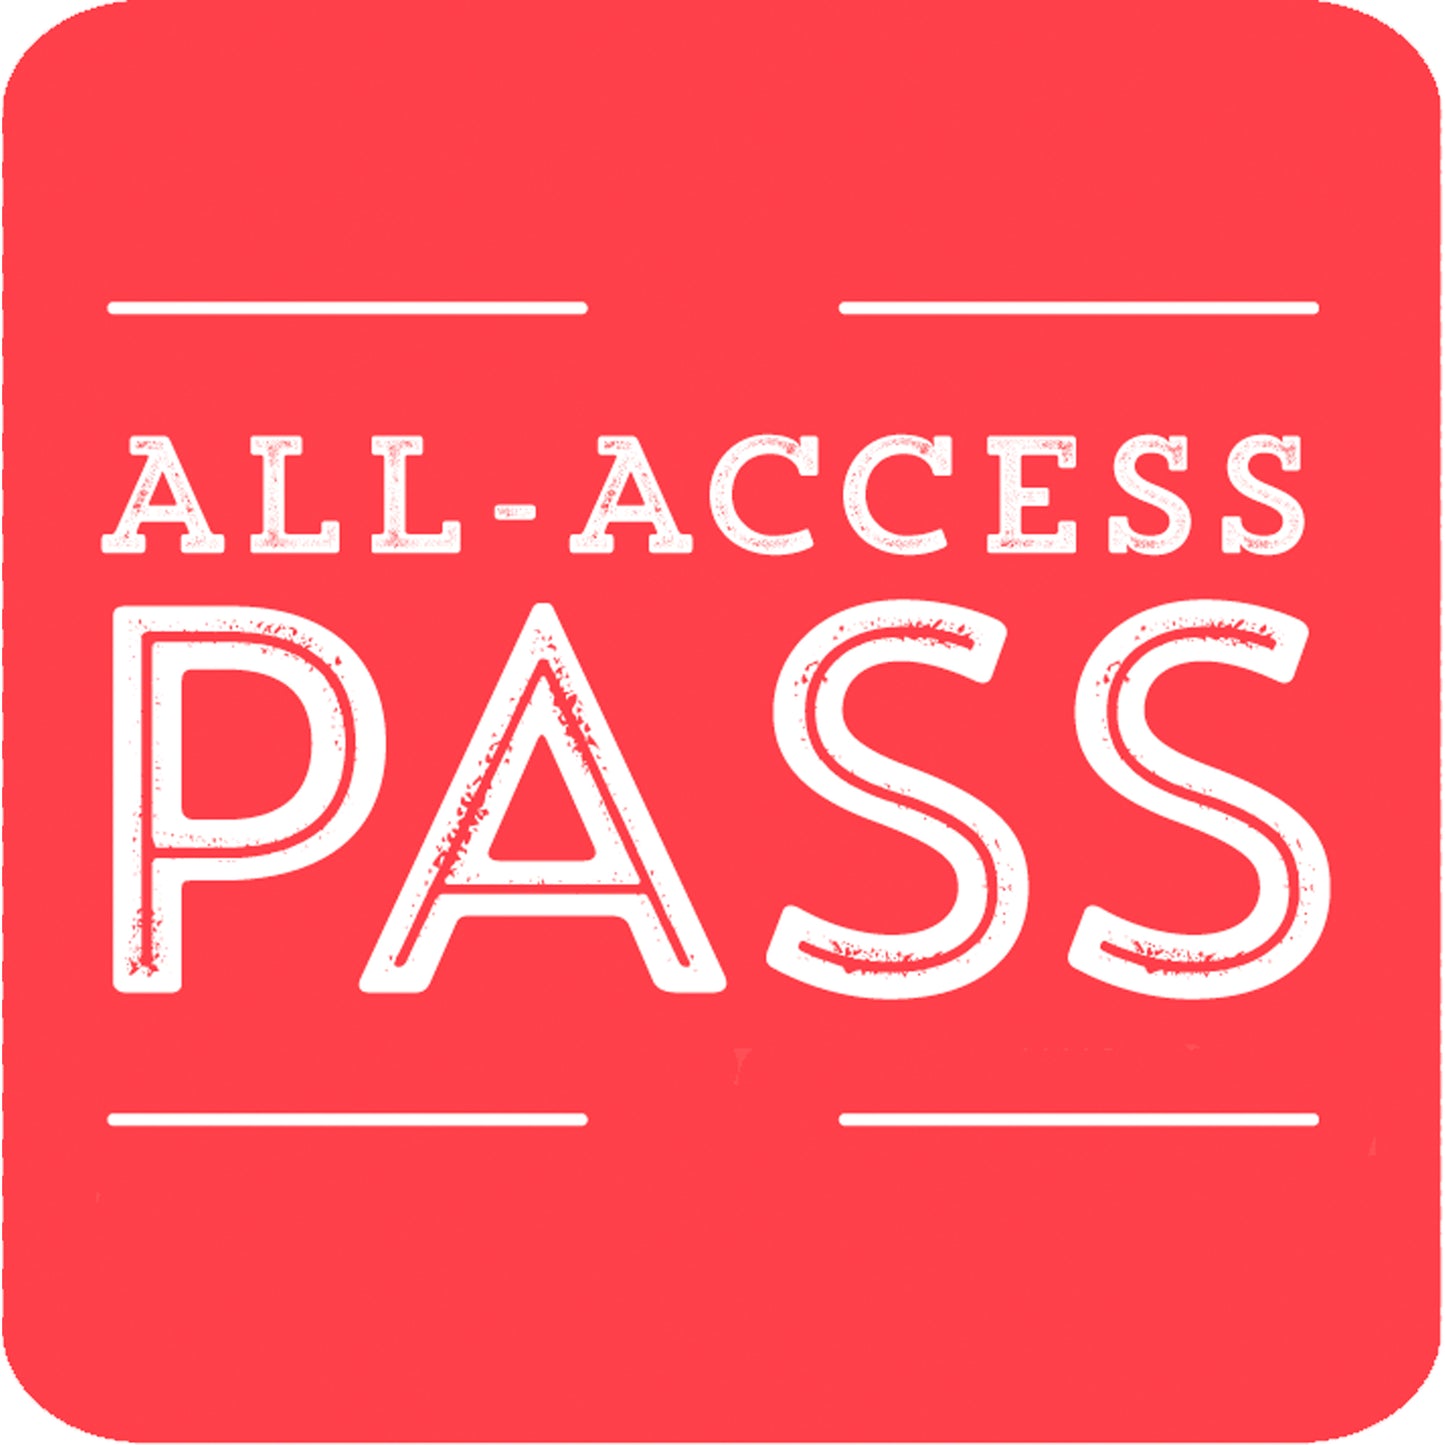 ENTIRE STORE All Access Pass - All Past, Current and Future Digital Products